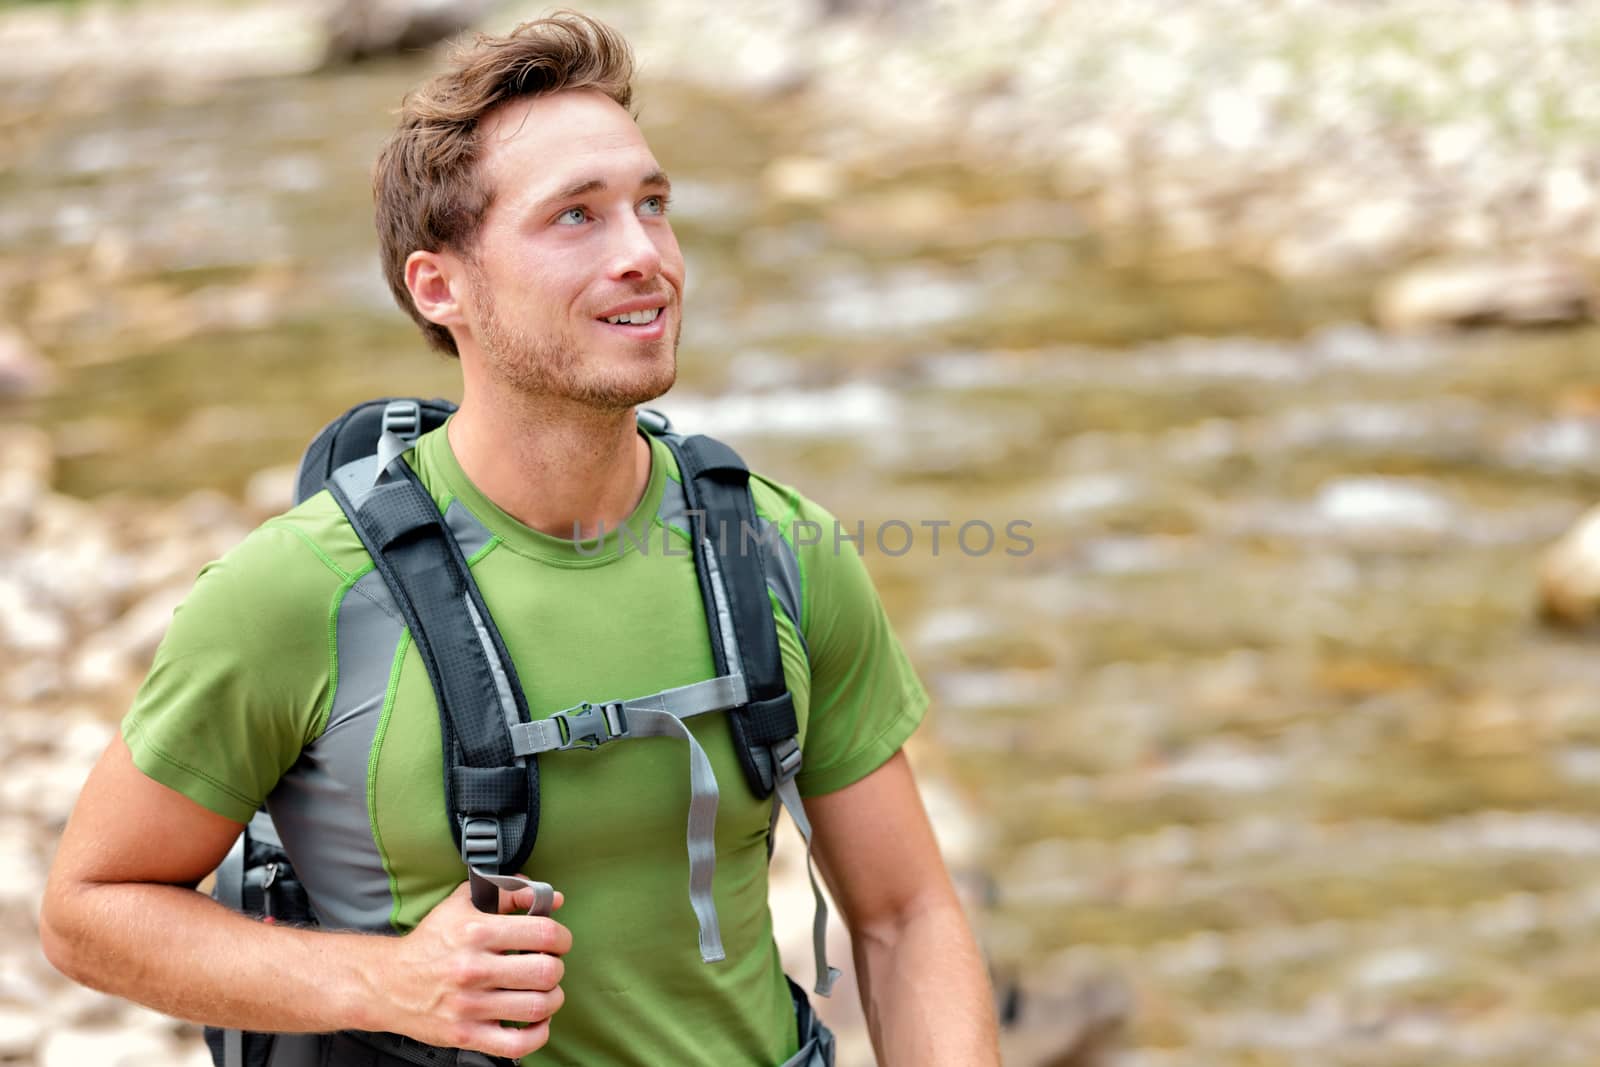 Happy hiker hiking in nature in clean river water. Aspiration young Caucasian man walking in summer nature environment with backpack. Hope, adventure travel or active lifestyle concept.